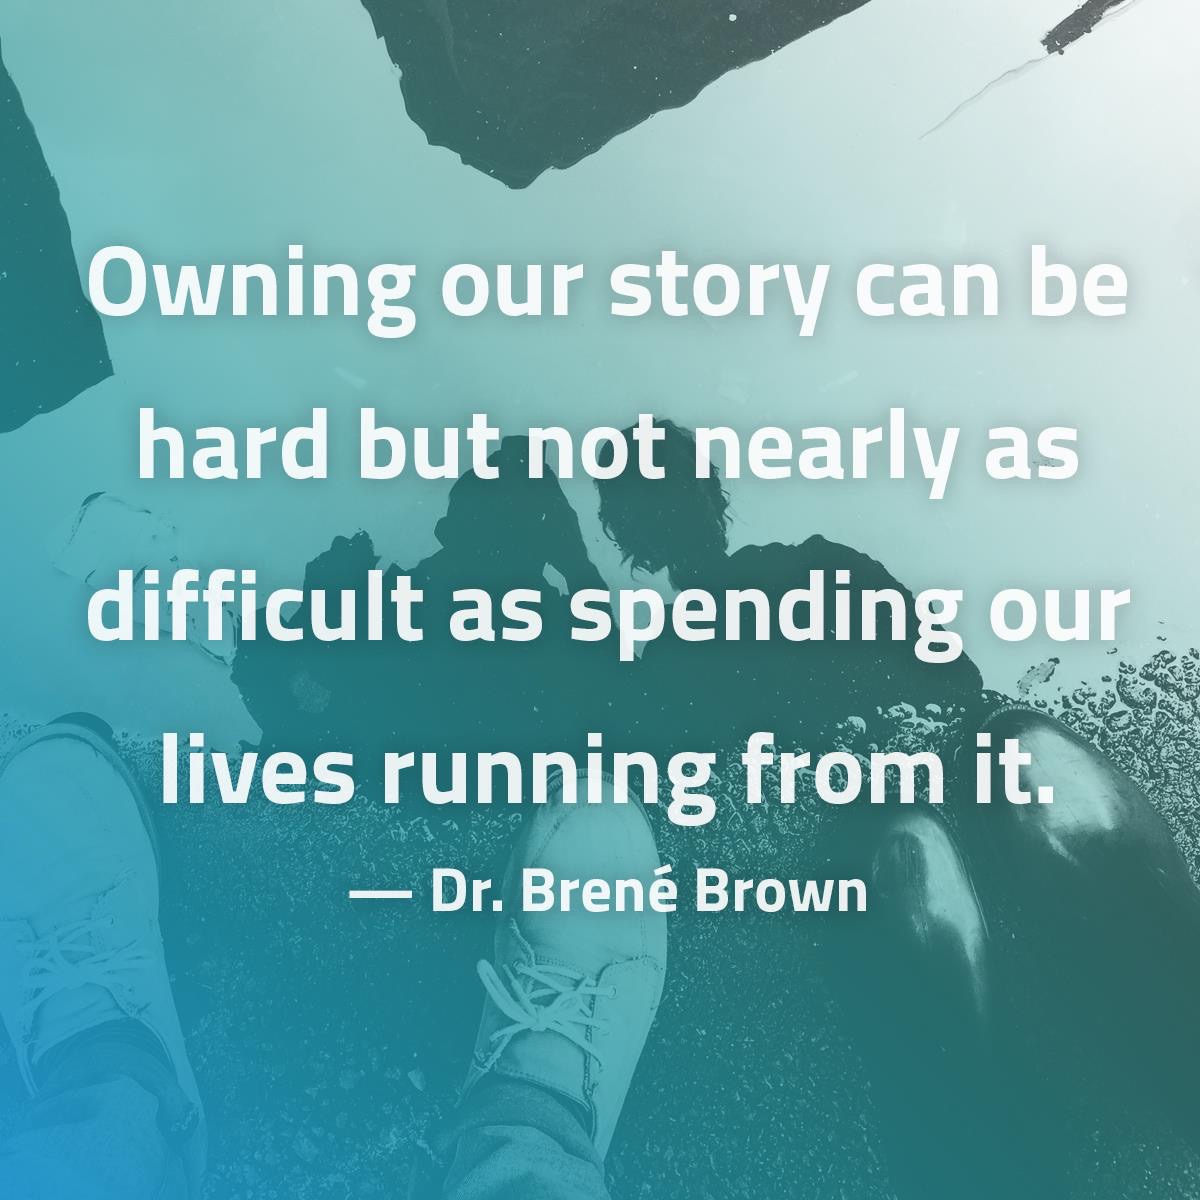 Brené Brown - Own Your Story